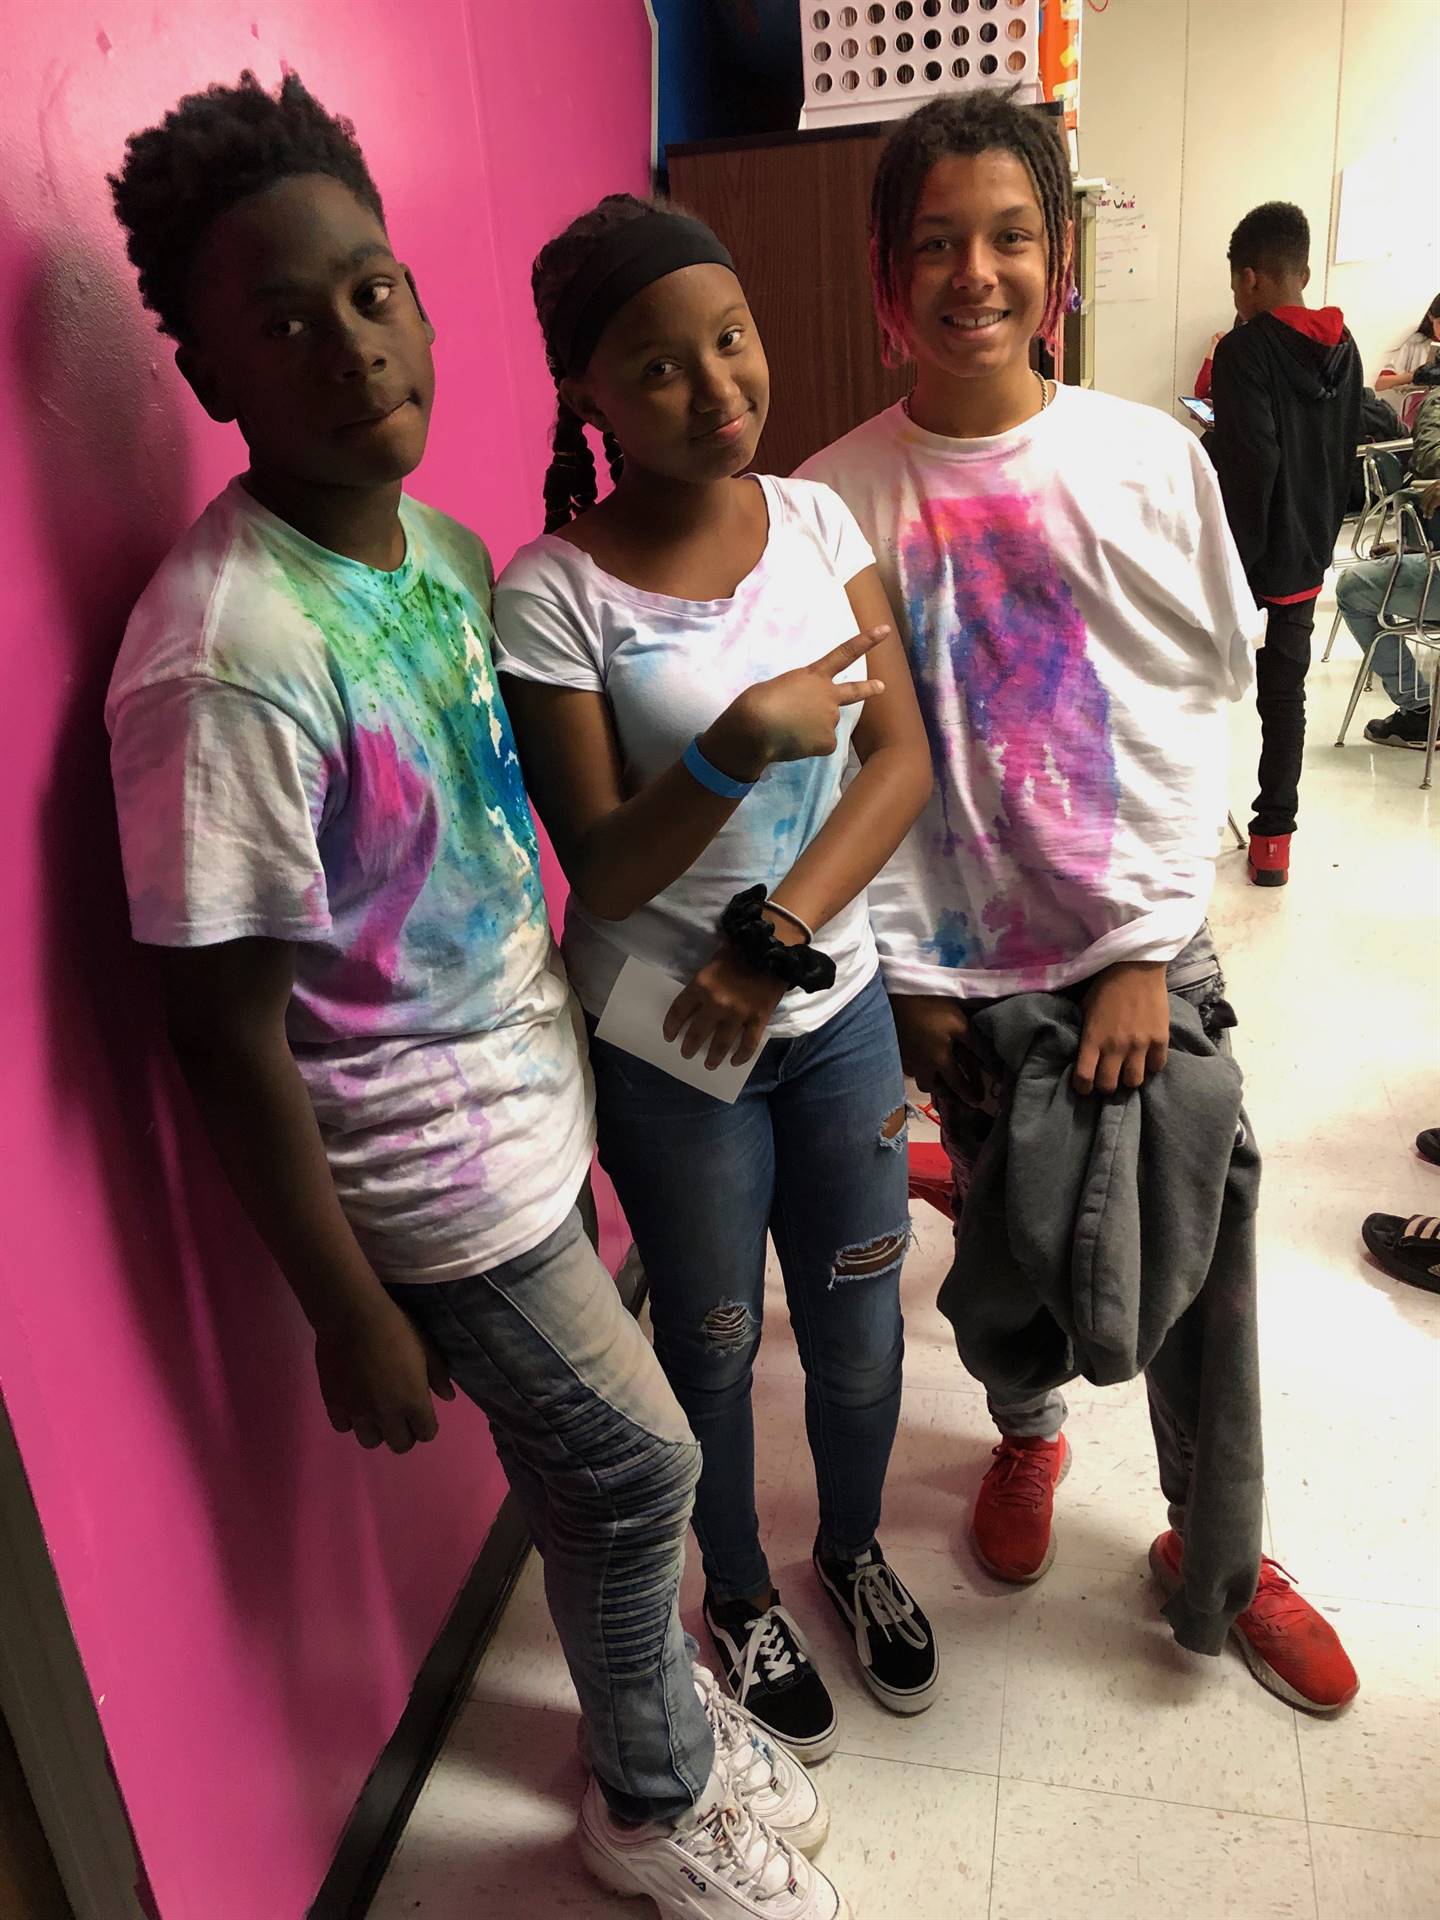 Students with colored shirts